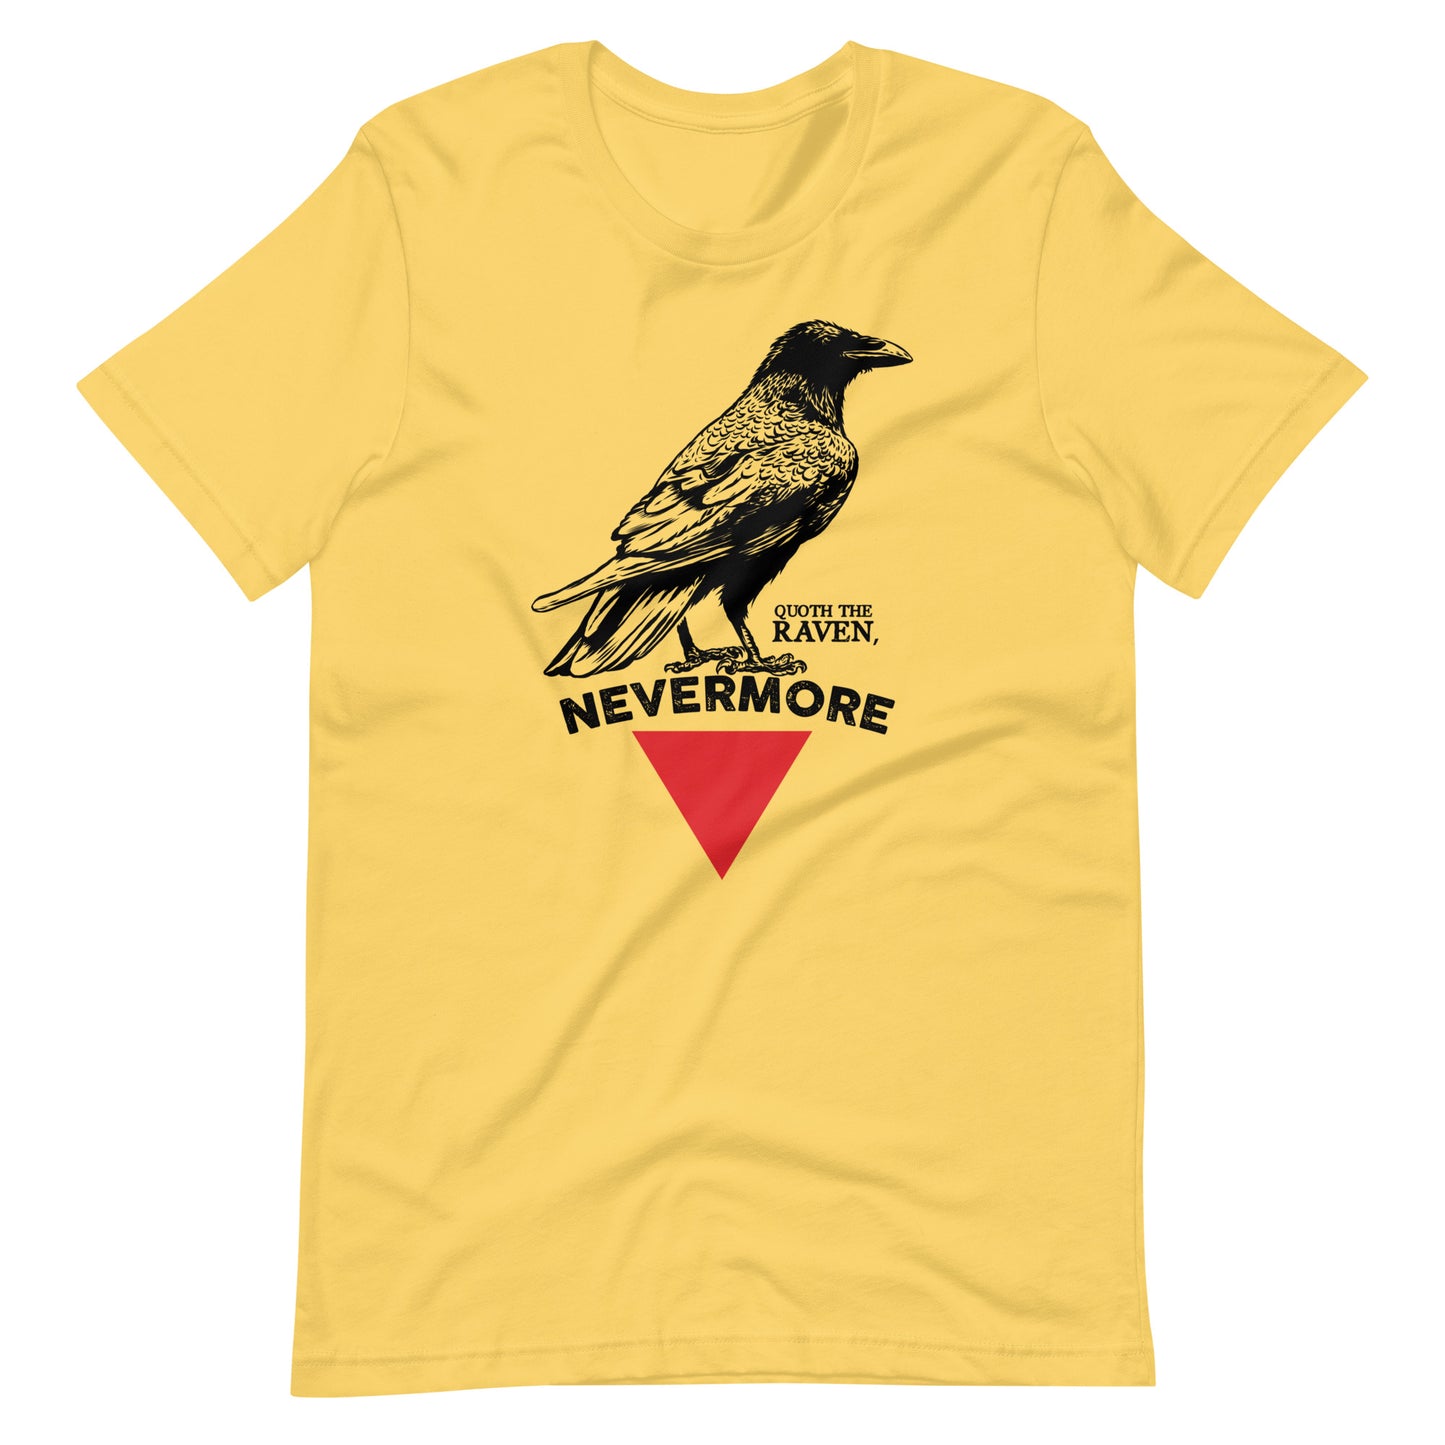 The Raven Nevermore Triangle - Men's t-shirt - Yellow Front